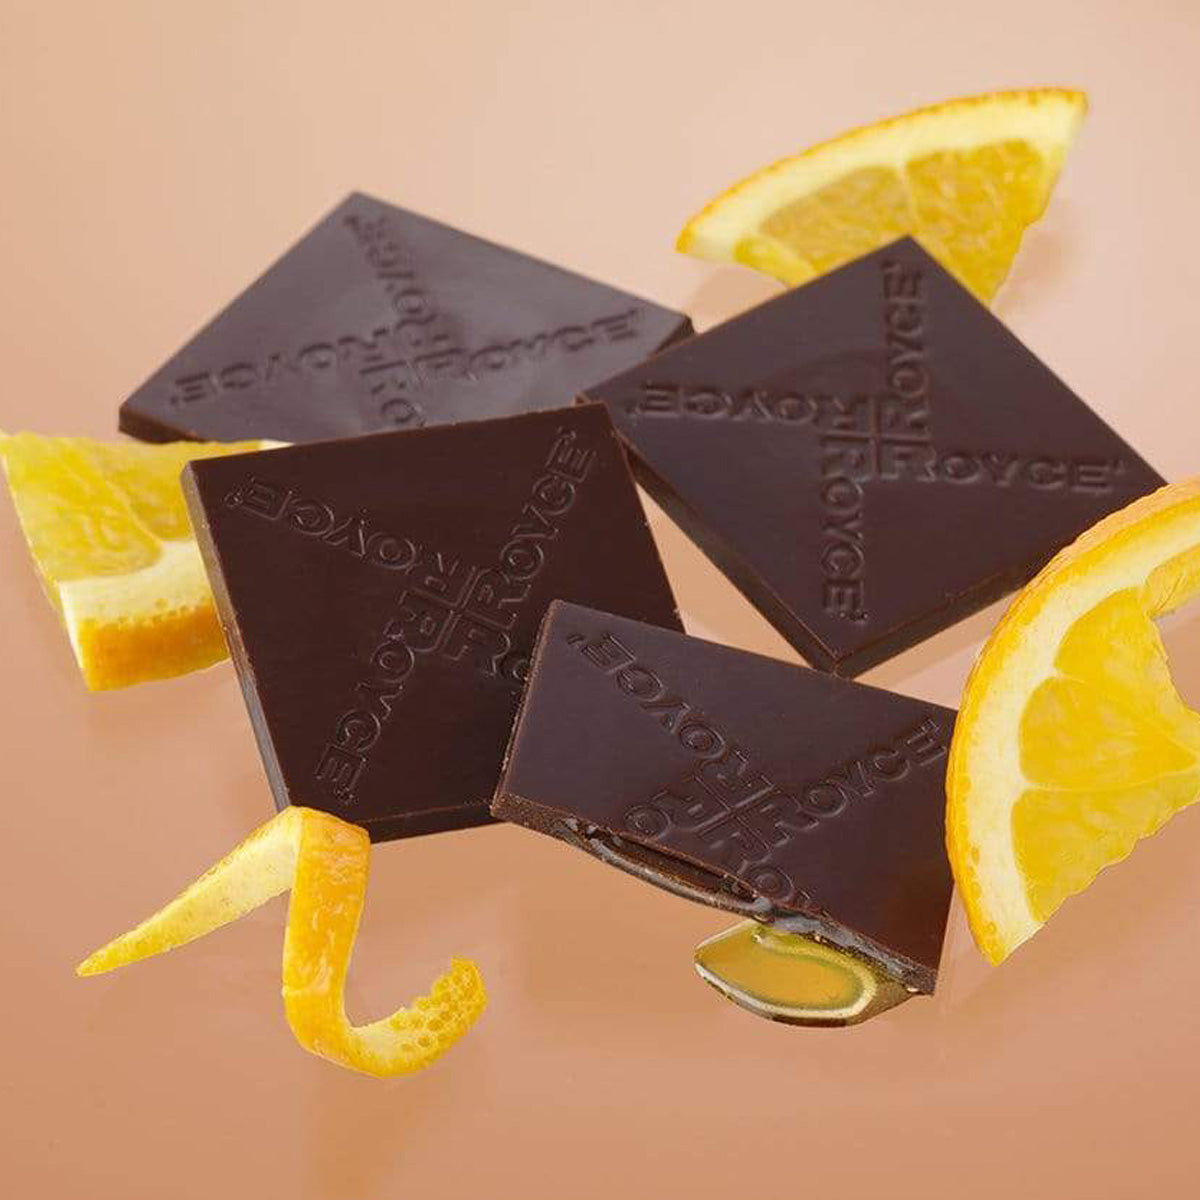 ROYCE' Chocolate - Prafeuille Chocolat "Orange" - Image shows brown chocolate squares filled with orange sauce and with the words "ROYCE'" engraved. Accents include fruit slices of orange and orange skin peel. Background is in color light brown.